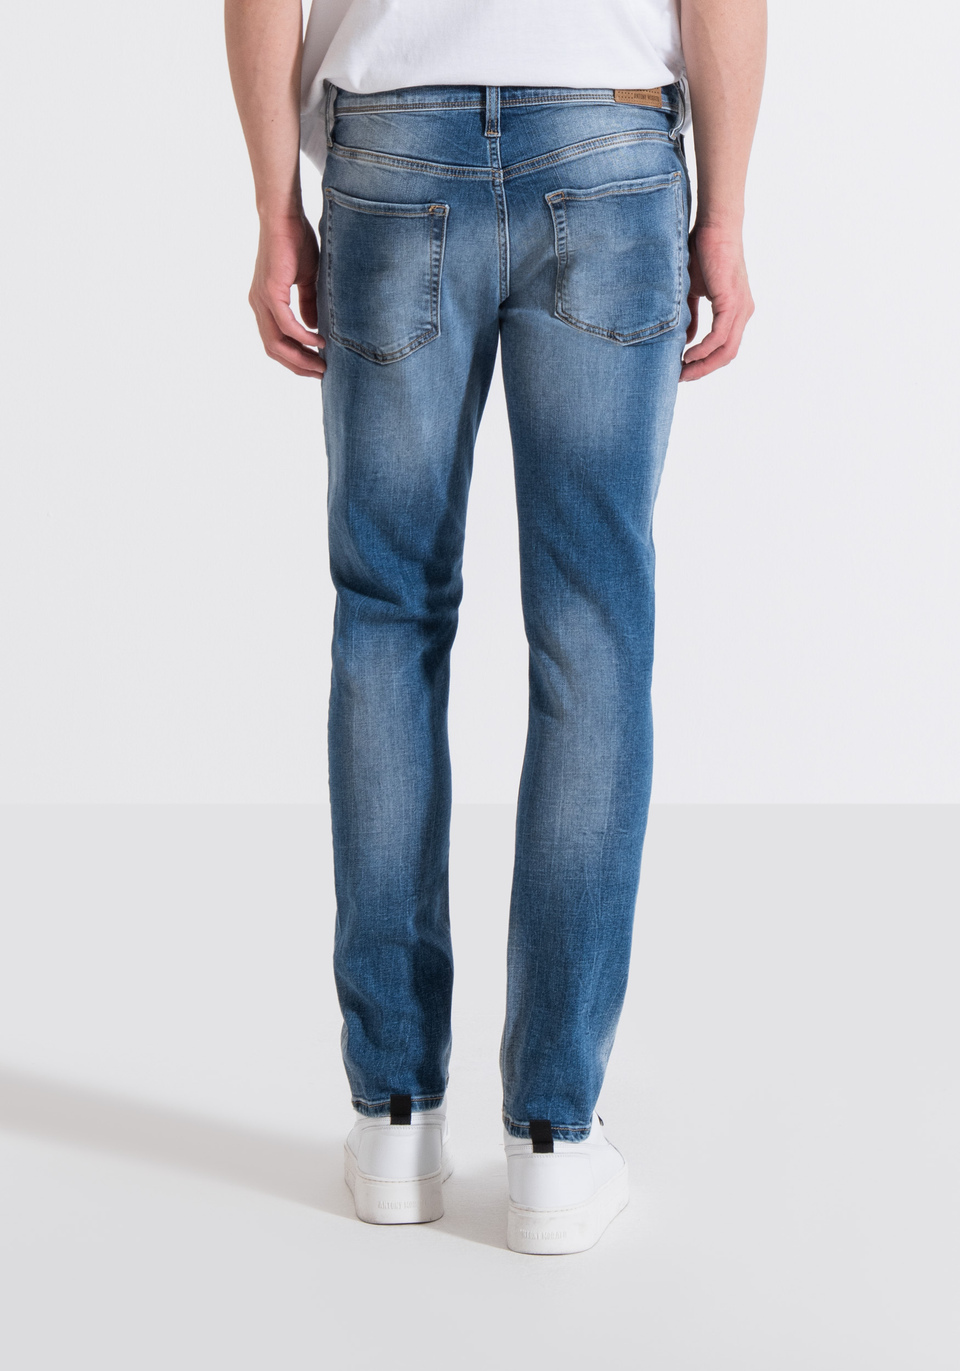 JEANS TAPERED FIT „OZZY“ AUS STRETCH-DENIM MITTLERE WASCHUNG - Antony Morato Online Shop